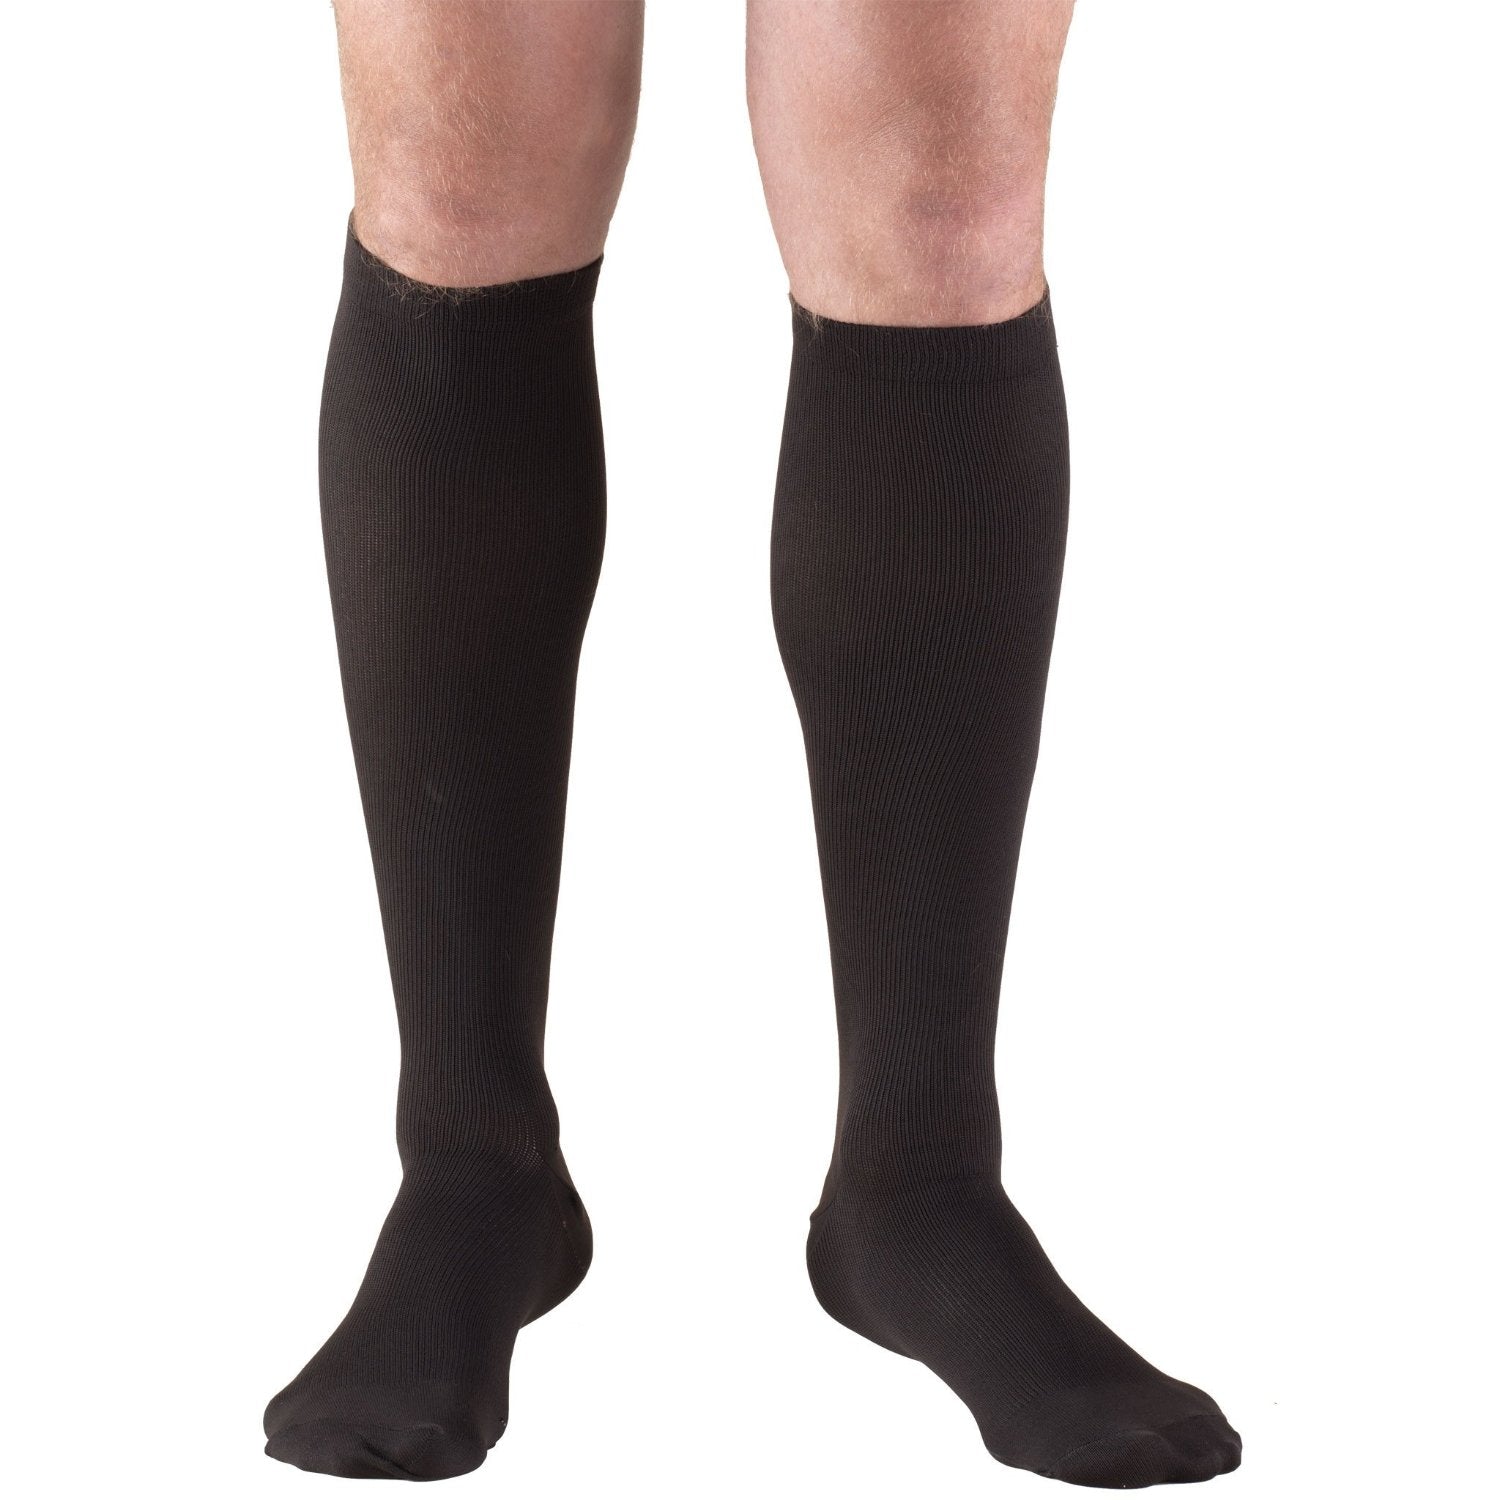 Compression socks are super cute and perfect for travel!  Cotton compression  socks, Outfits, Knee high socks outfit